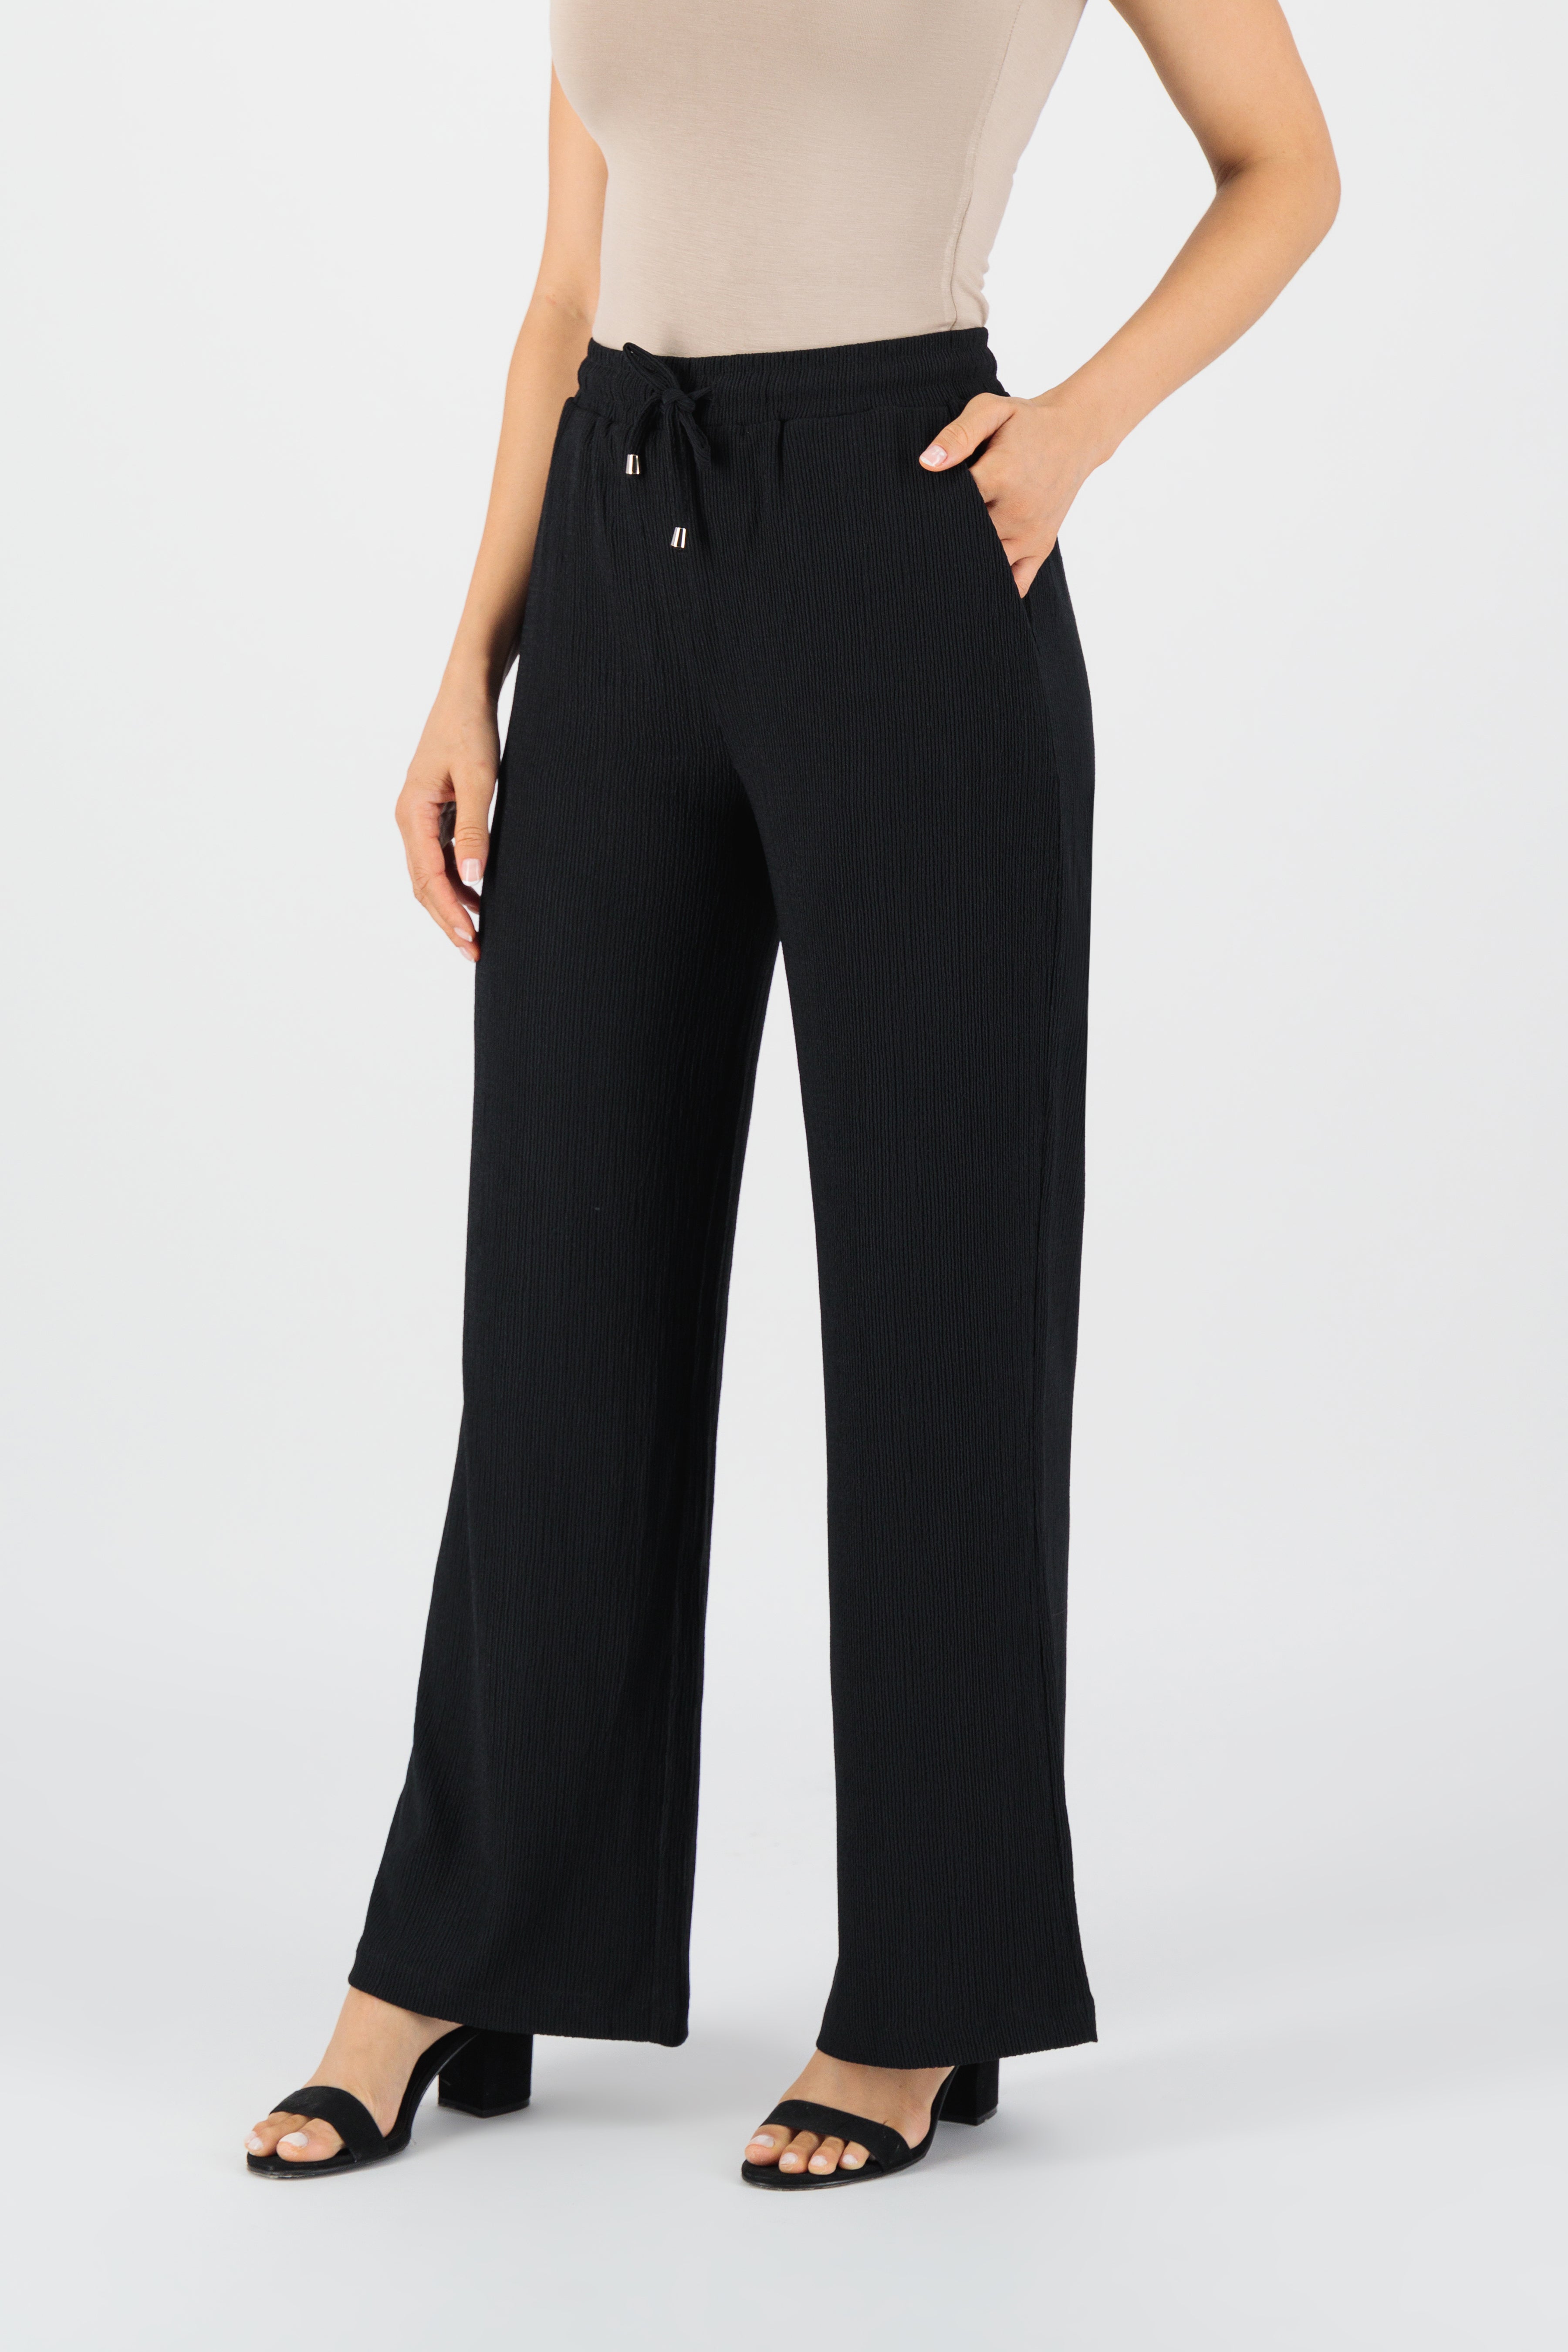 CA - Relaxed-Fit Pants - Black